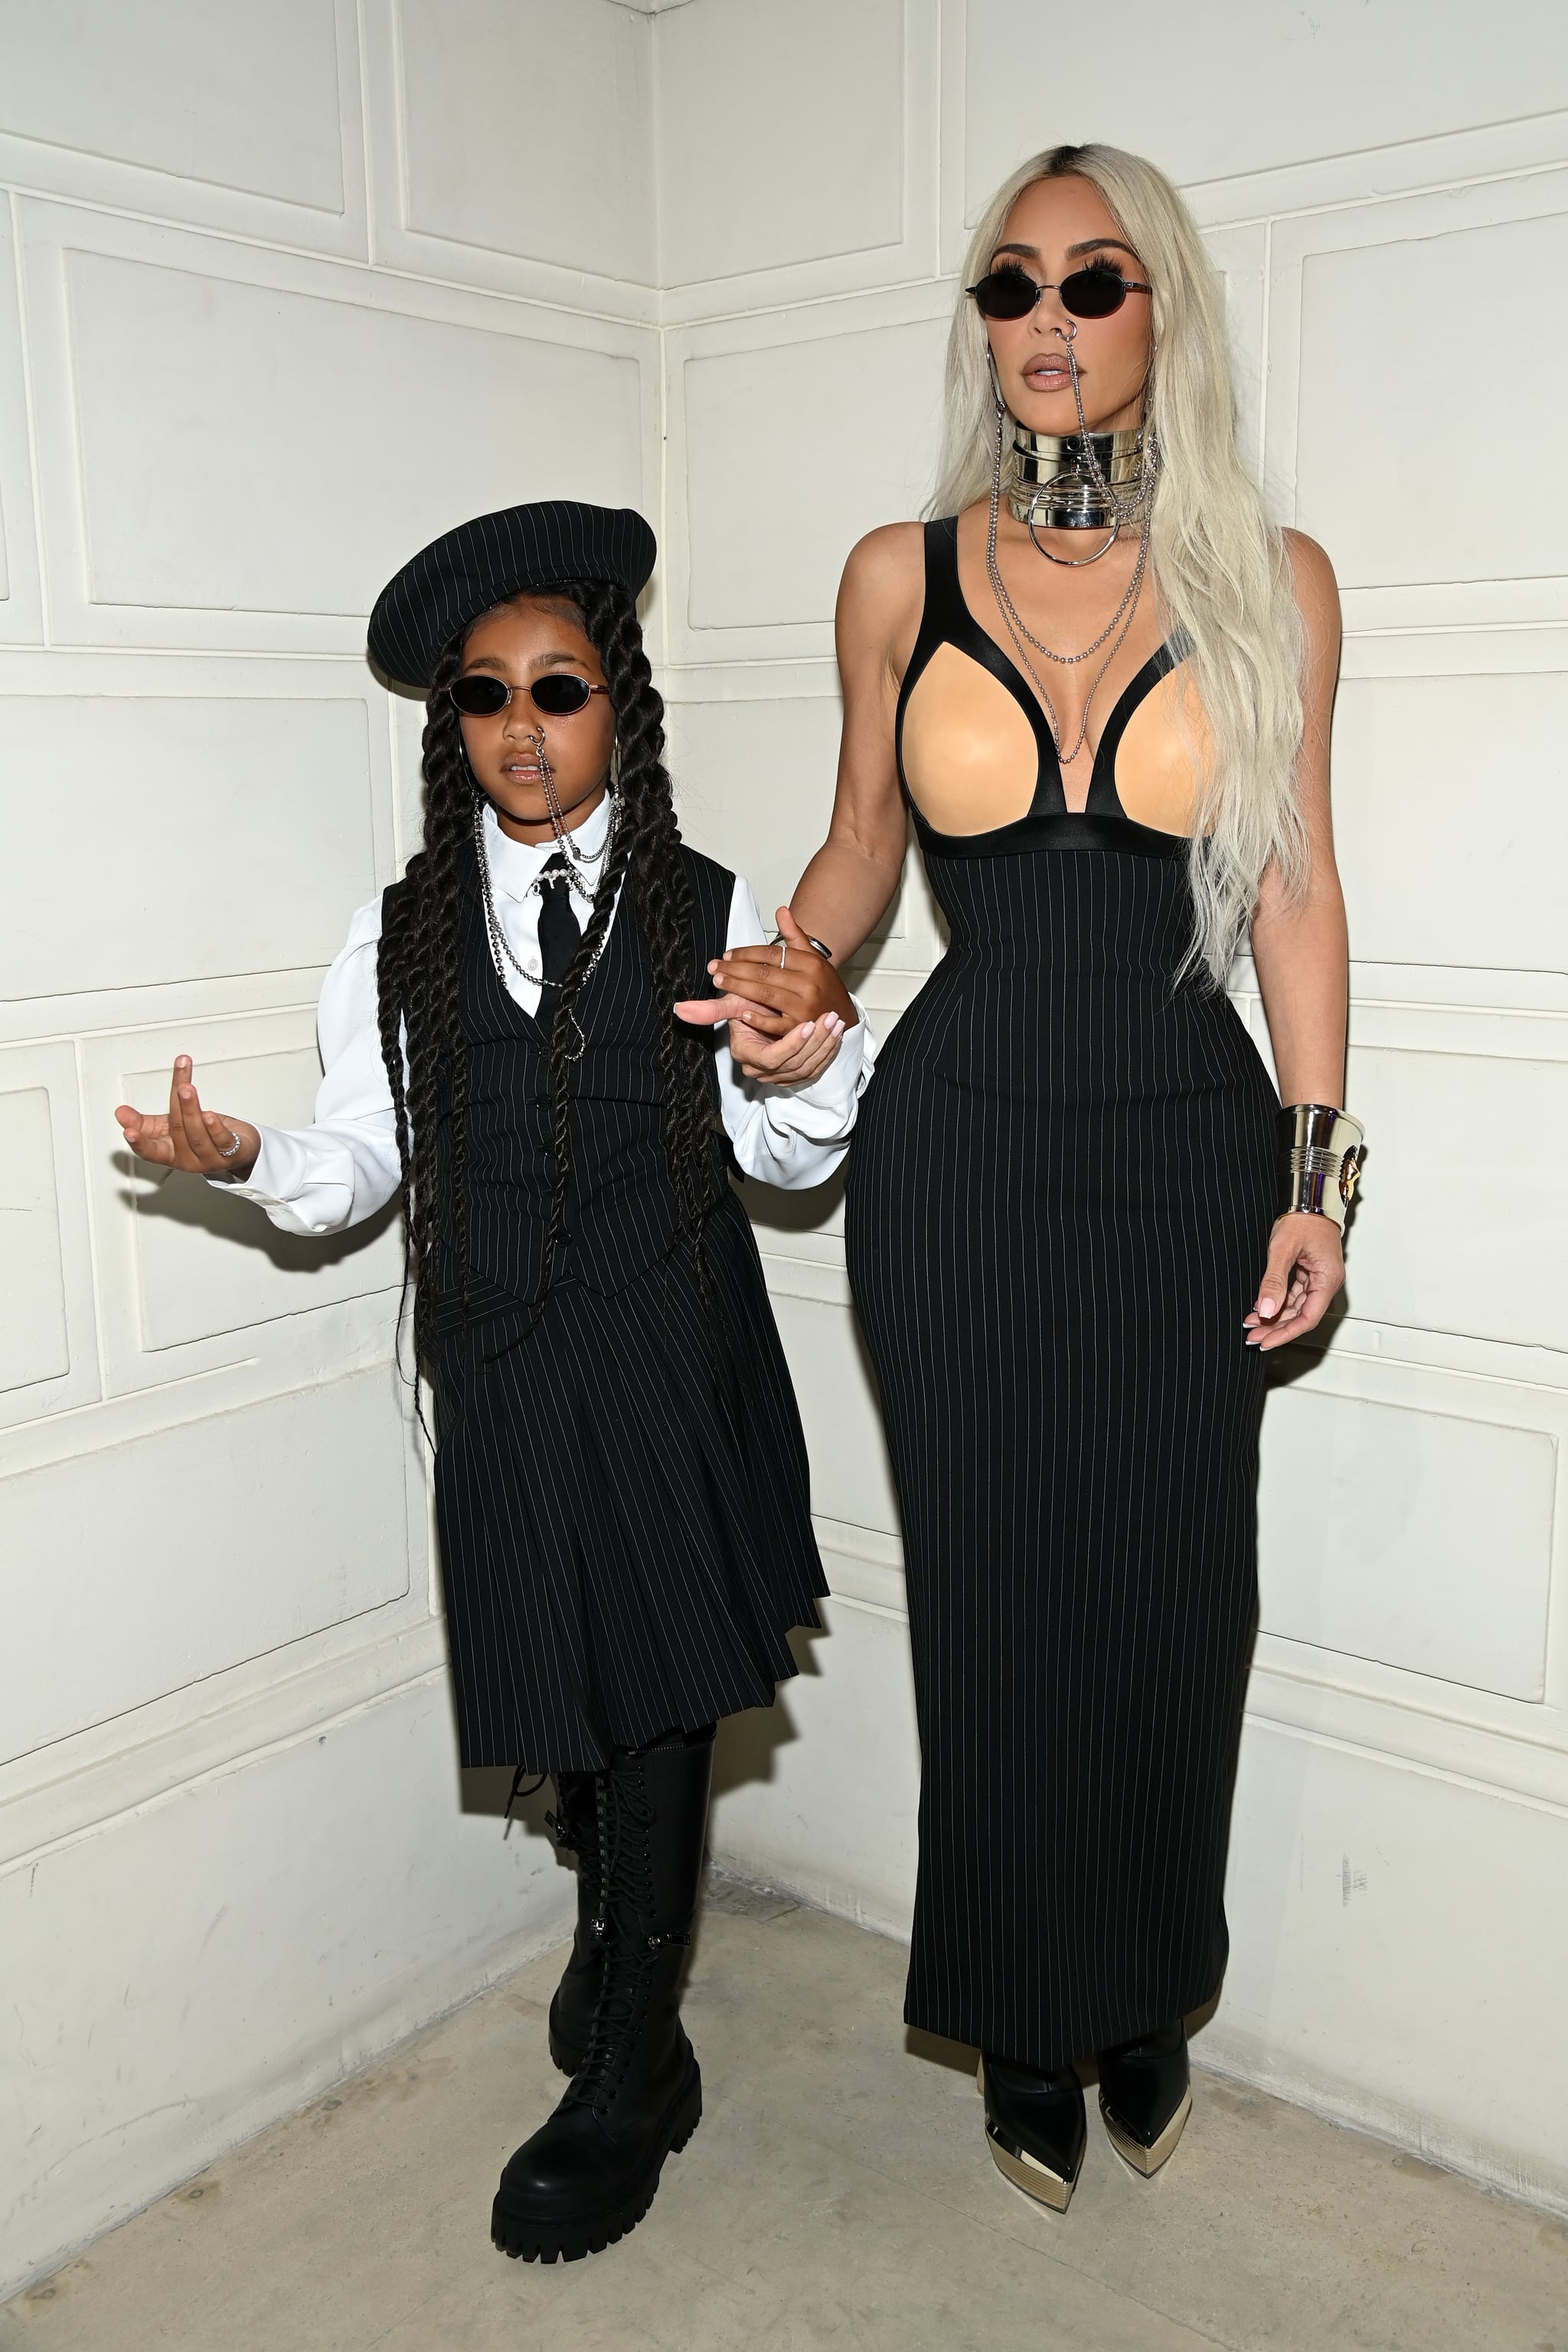 PARIS, FRANCE - JULY 06: (EDITORIAL USE ONLY - For Non-Editorial use please seek approval from Fashion House) North West and Kim Kardashian attend the Jean-Paul Gaultier Haute Couture Fall Winter 2022 2023 show as part of Paris Fashion Week  on July 06, 2022 in Paris, France. (Photo by Pascal Le Segretain/Getty Images)